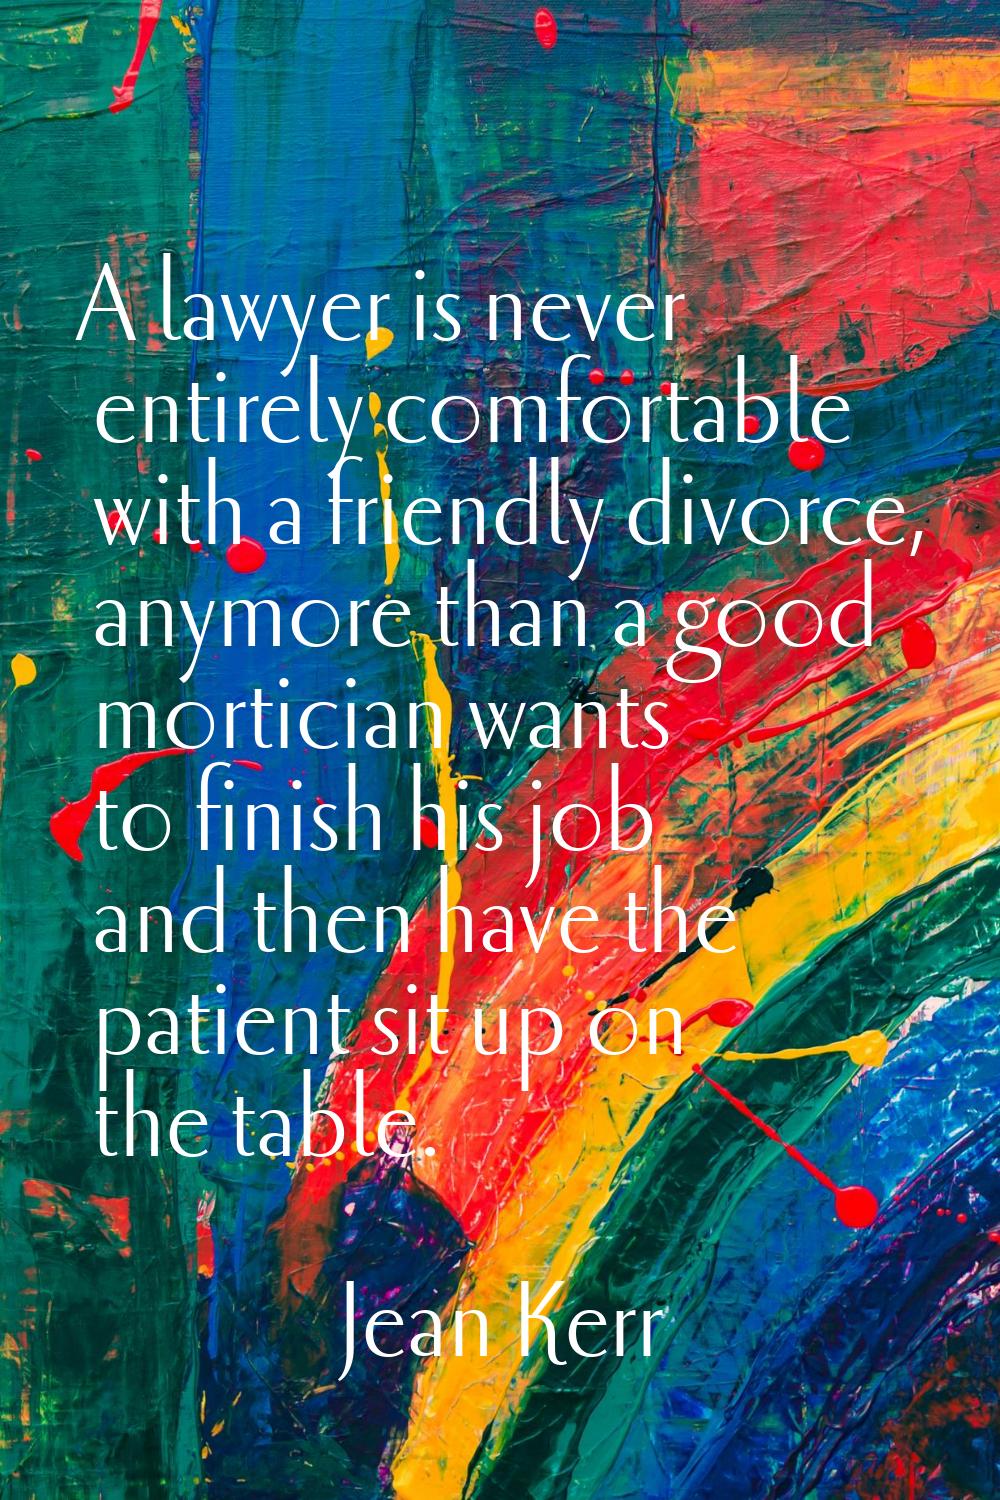 A lawyer is never entirely comfortable with a friendly divorce, anymore than a good mortician wants